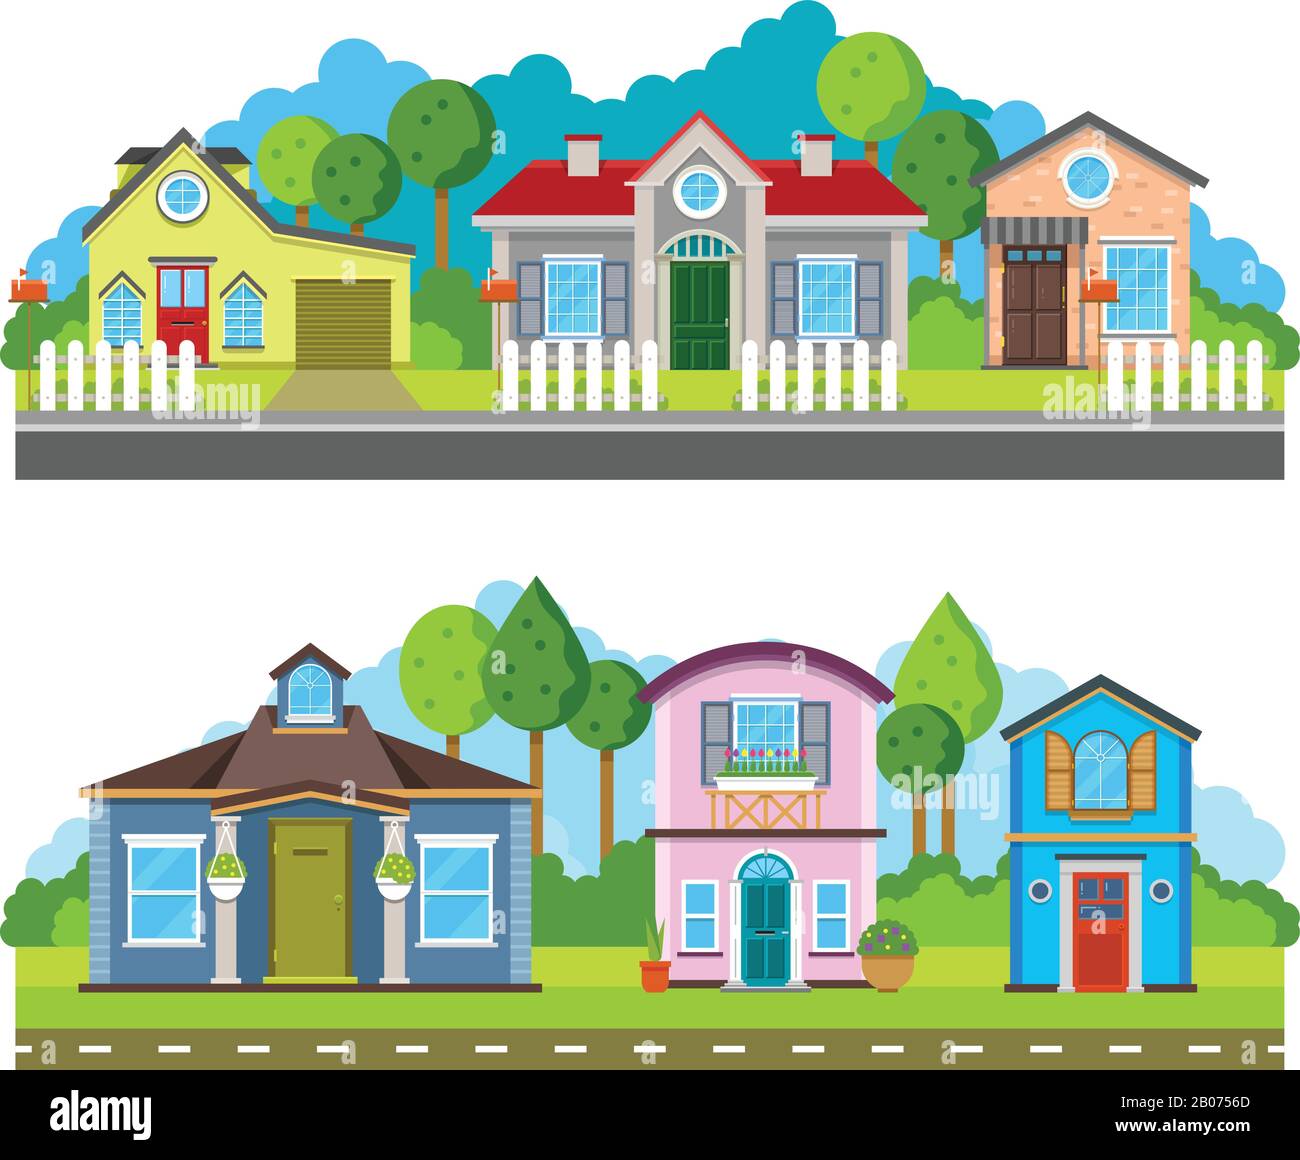 Residential village houses flat vector illustration, urban landscape. Street with building facade and green trees Stock Vector